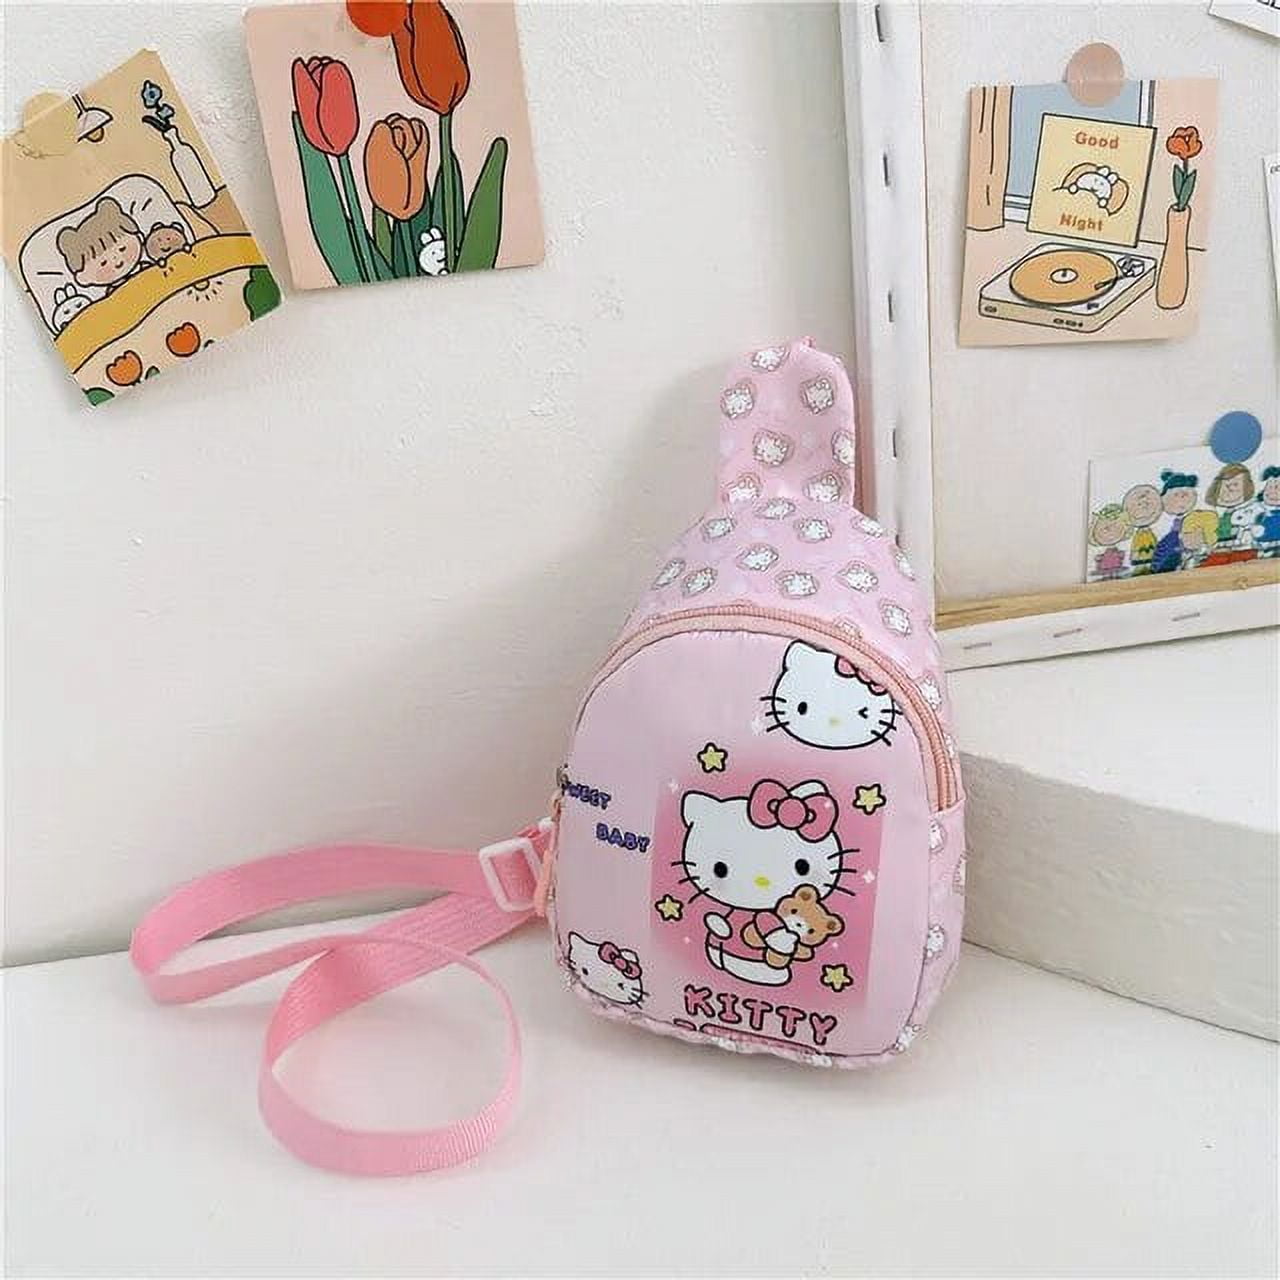 Buy Kitty Bag Online In India - Etsy India